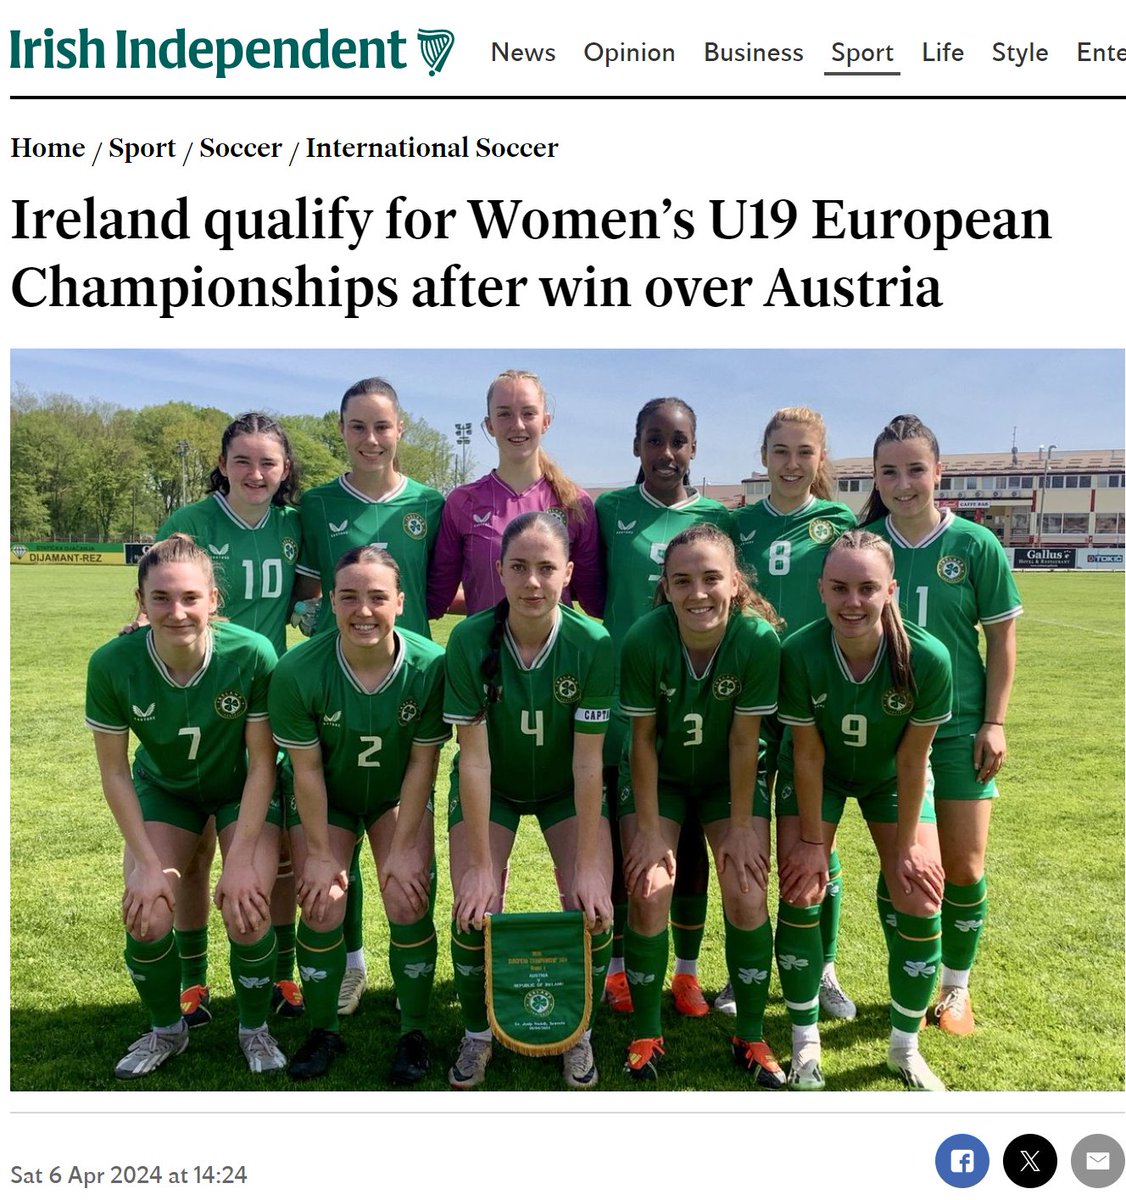 👏👏Congratulations to 🇮🇪 and our talented @Pres_Carlow student #AoifeKelly on the remarkable achievement. @Natsport @CeistTrust Ireland qualify for Women’s U19 European Championships after win over Austria independent.ie/sport/soccer/i…